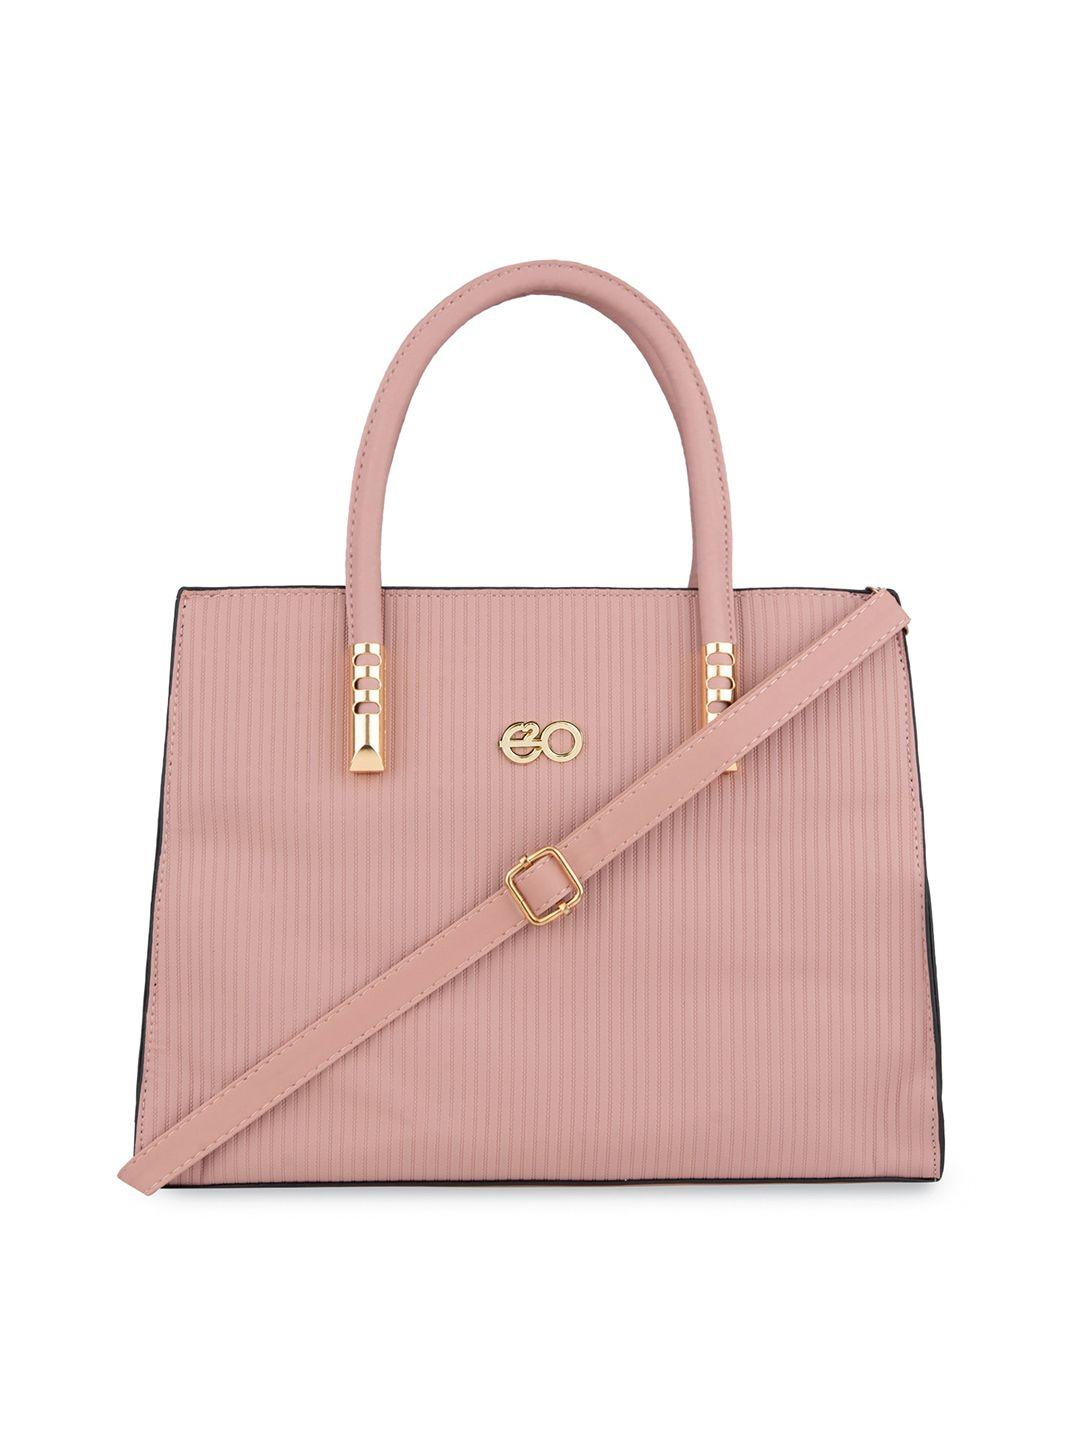 e2o pink textured pu structured handheld bag